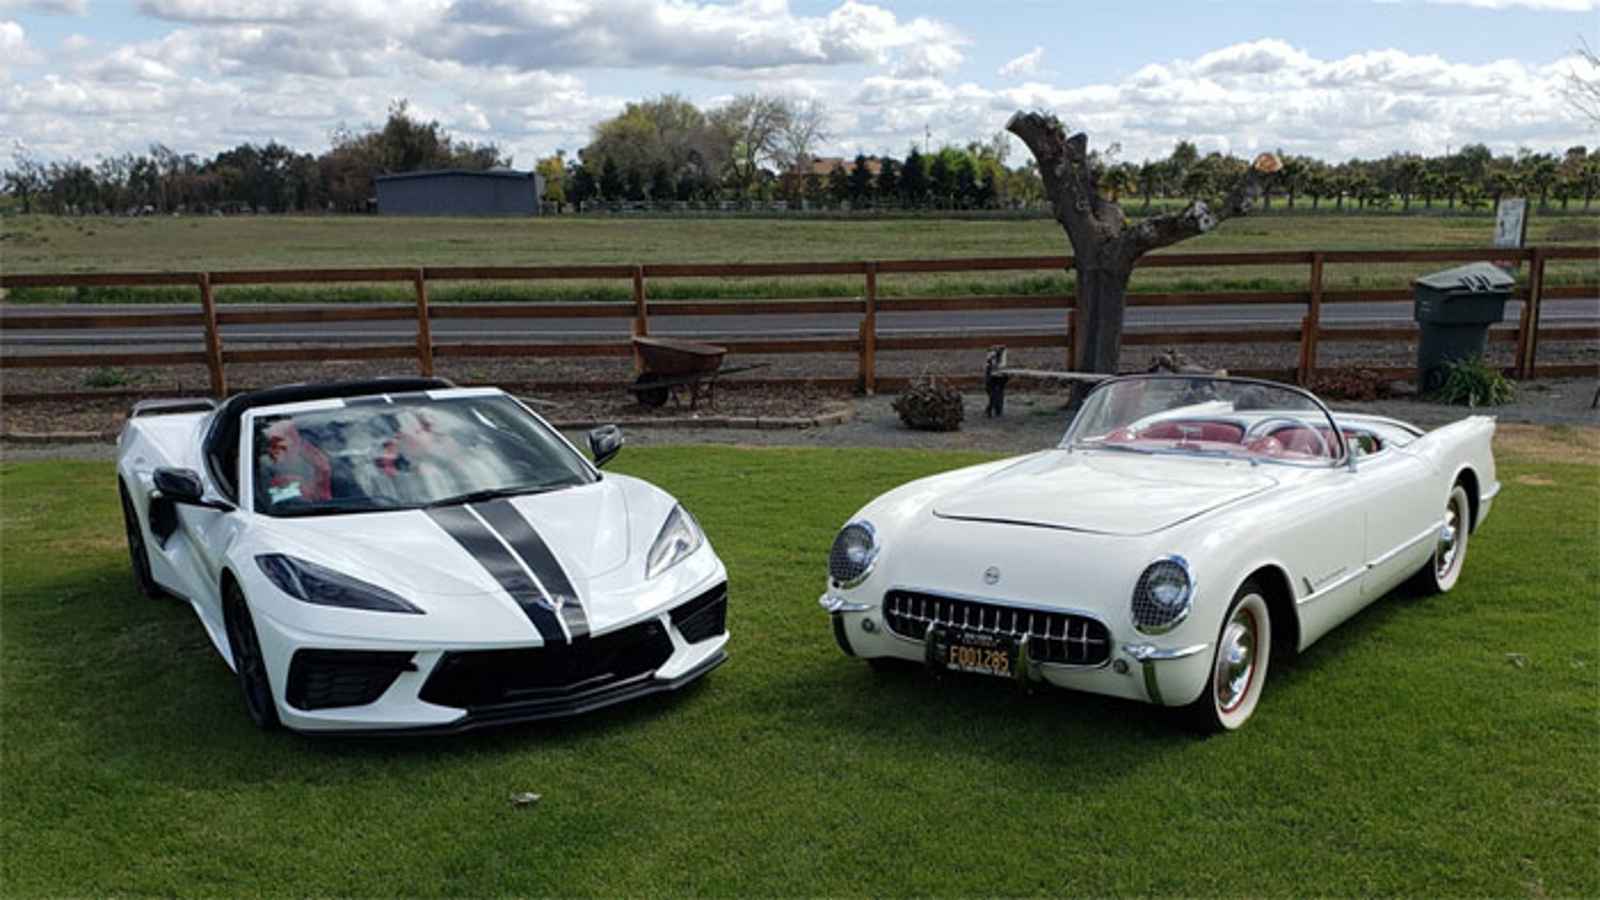 National Corvette Day 2023: Date, History, Facts, Activities